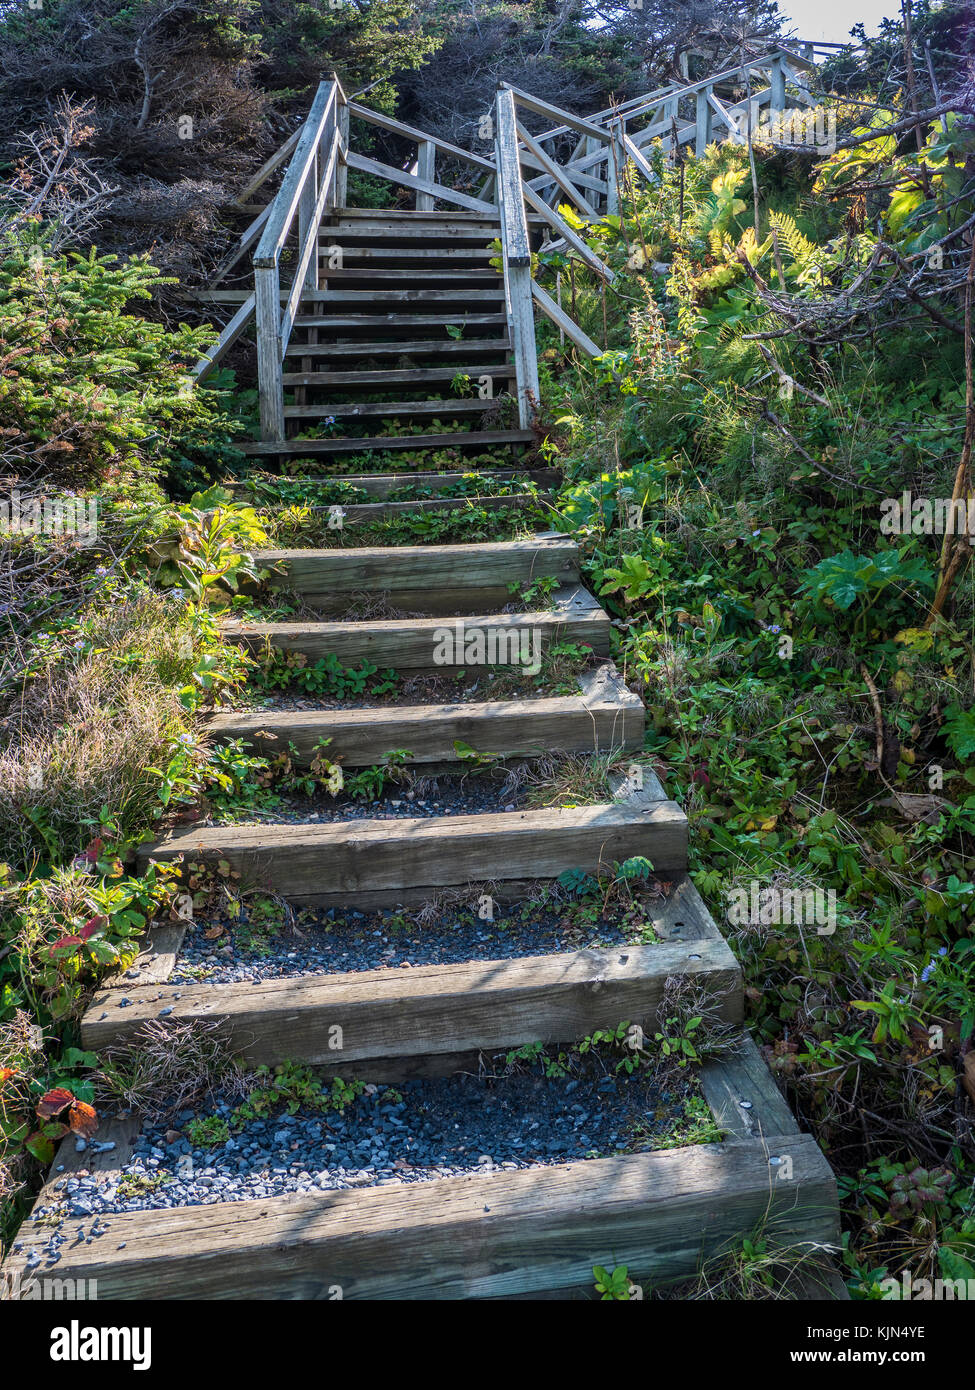 Steps down to the S.S. Ethie shipwreck site, Highway 430, the Viking Trail, Gros Morne National Park, Newfoundland, Canada. Stock Photo